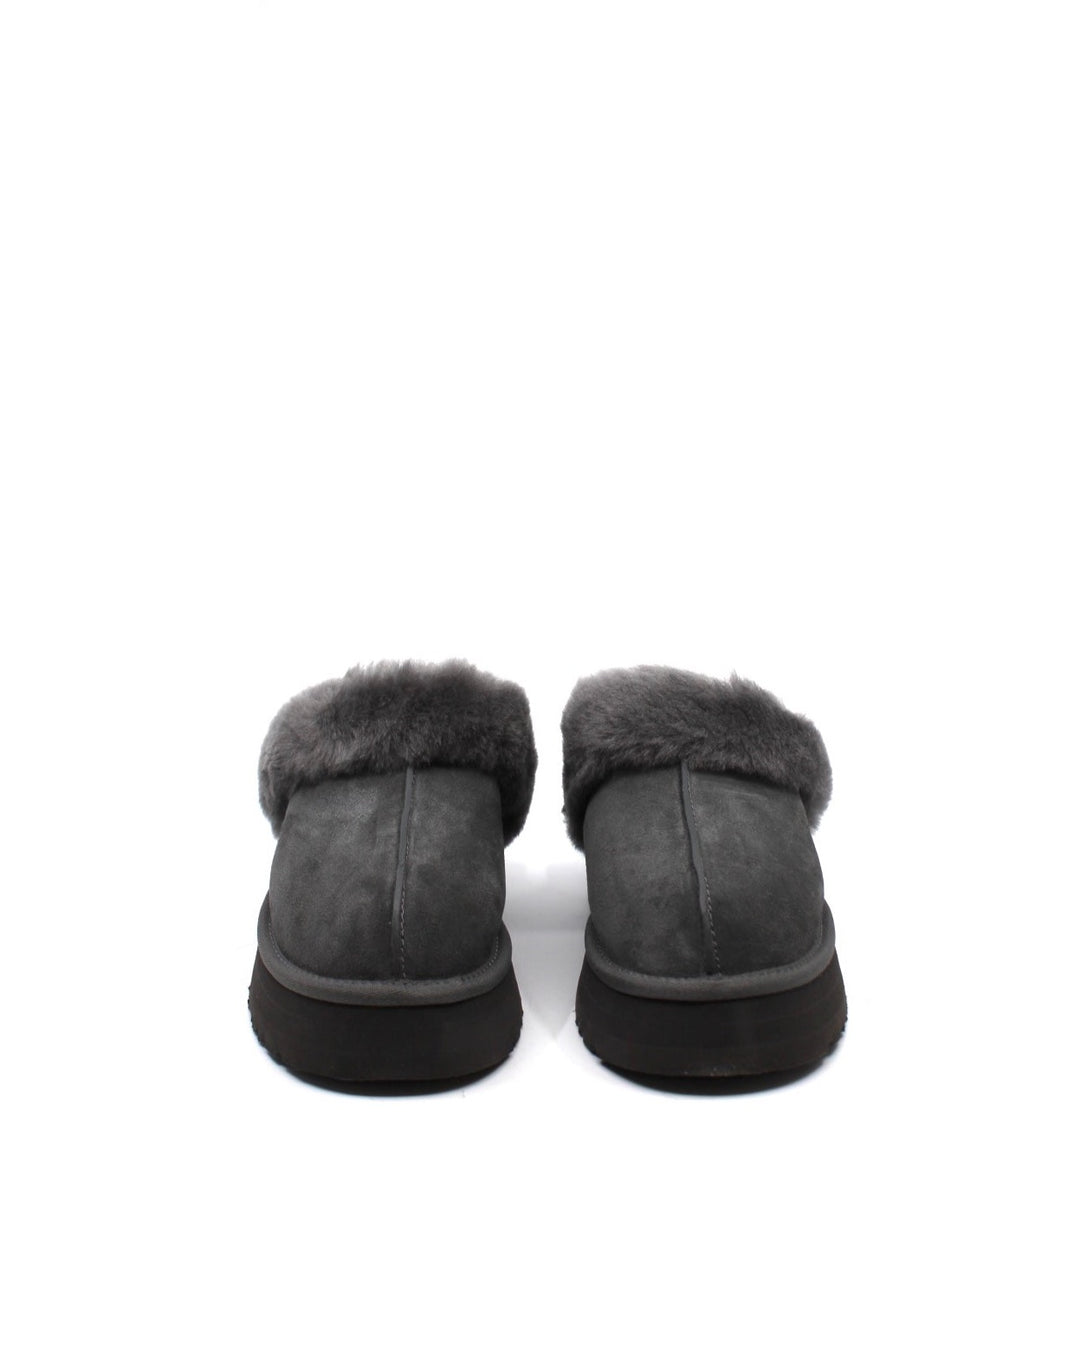 Ugg Disquette Charcoal - Dear Lucy